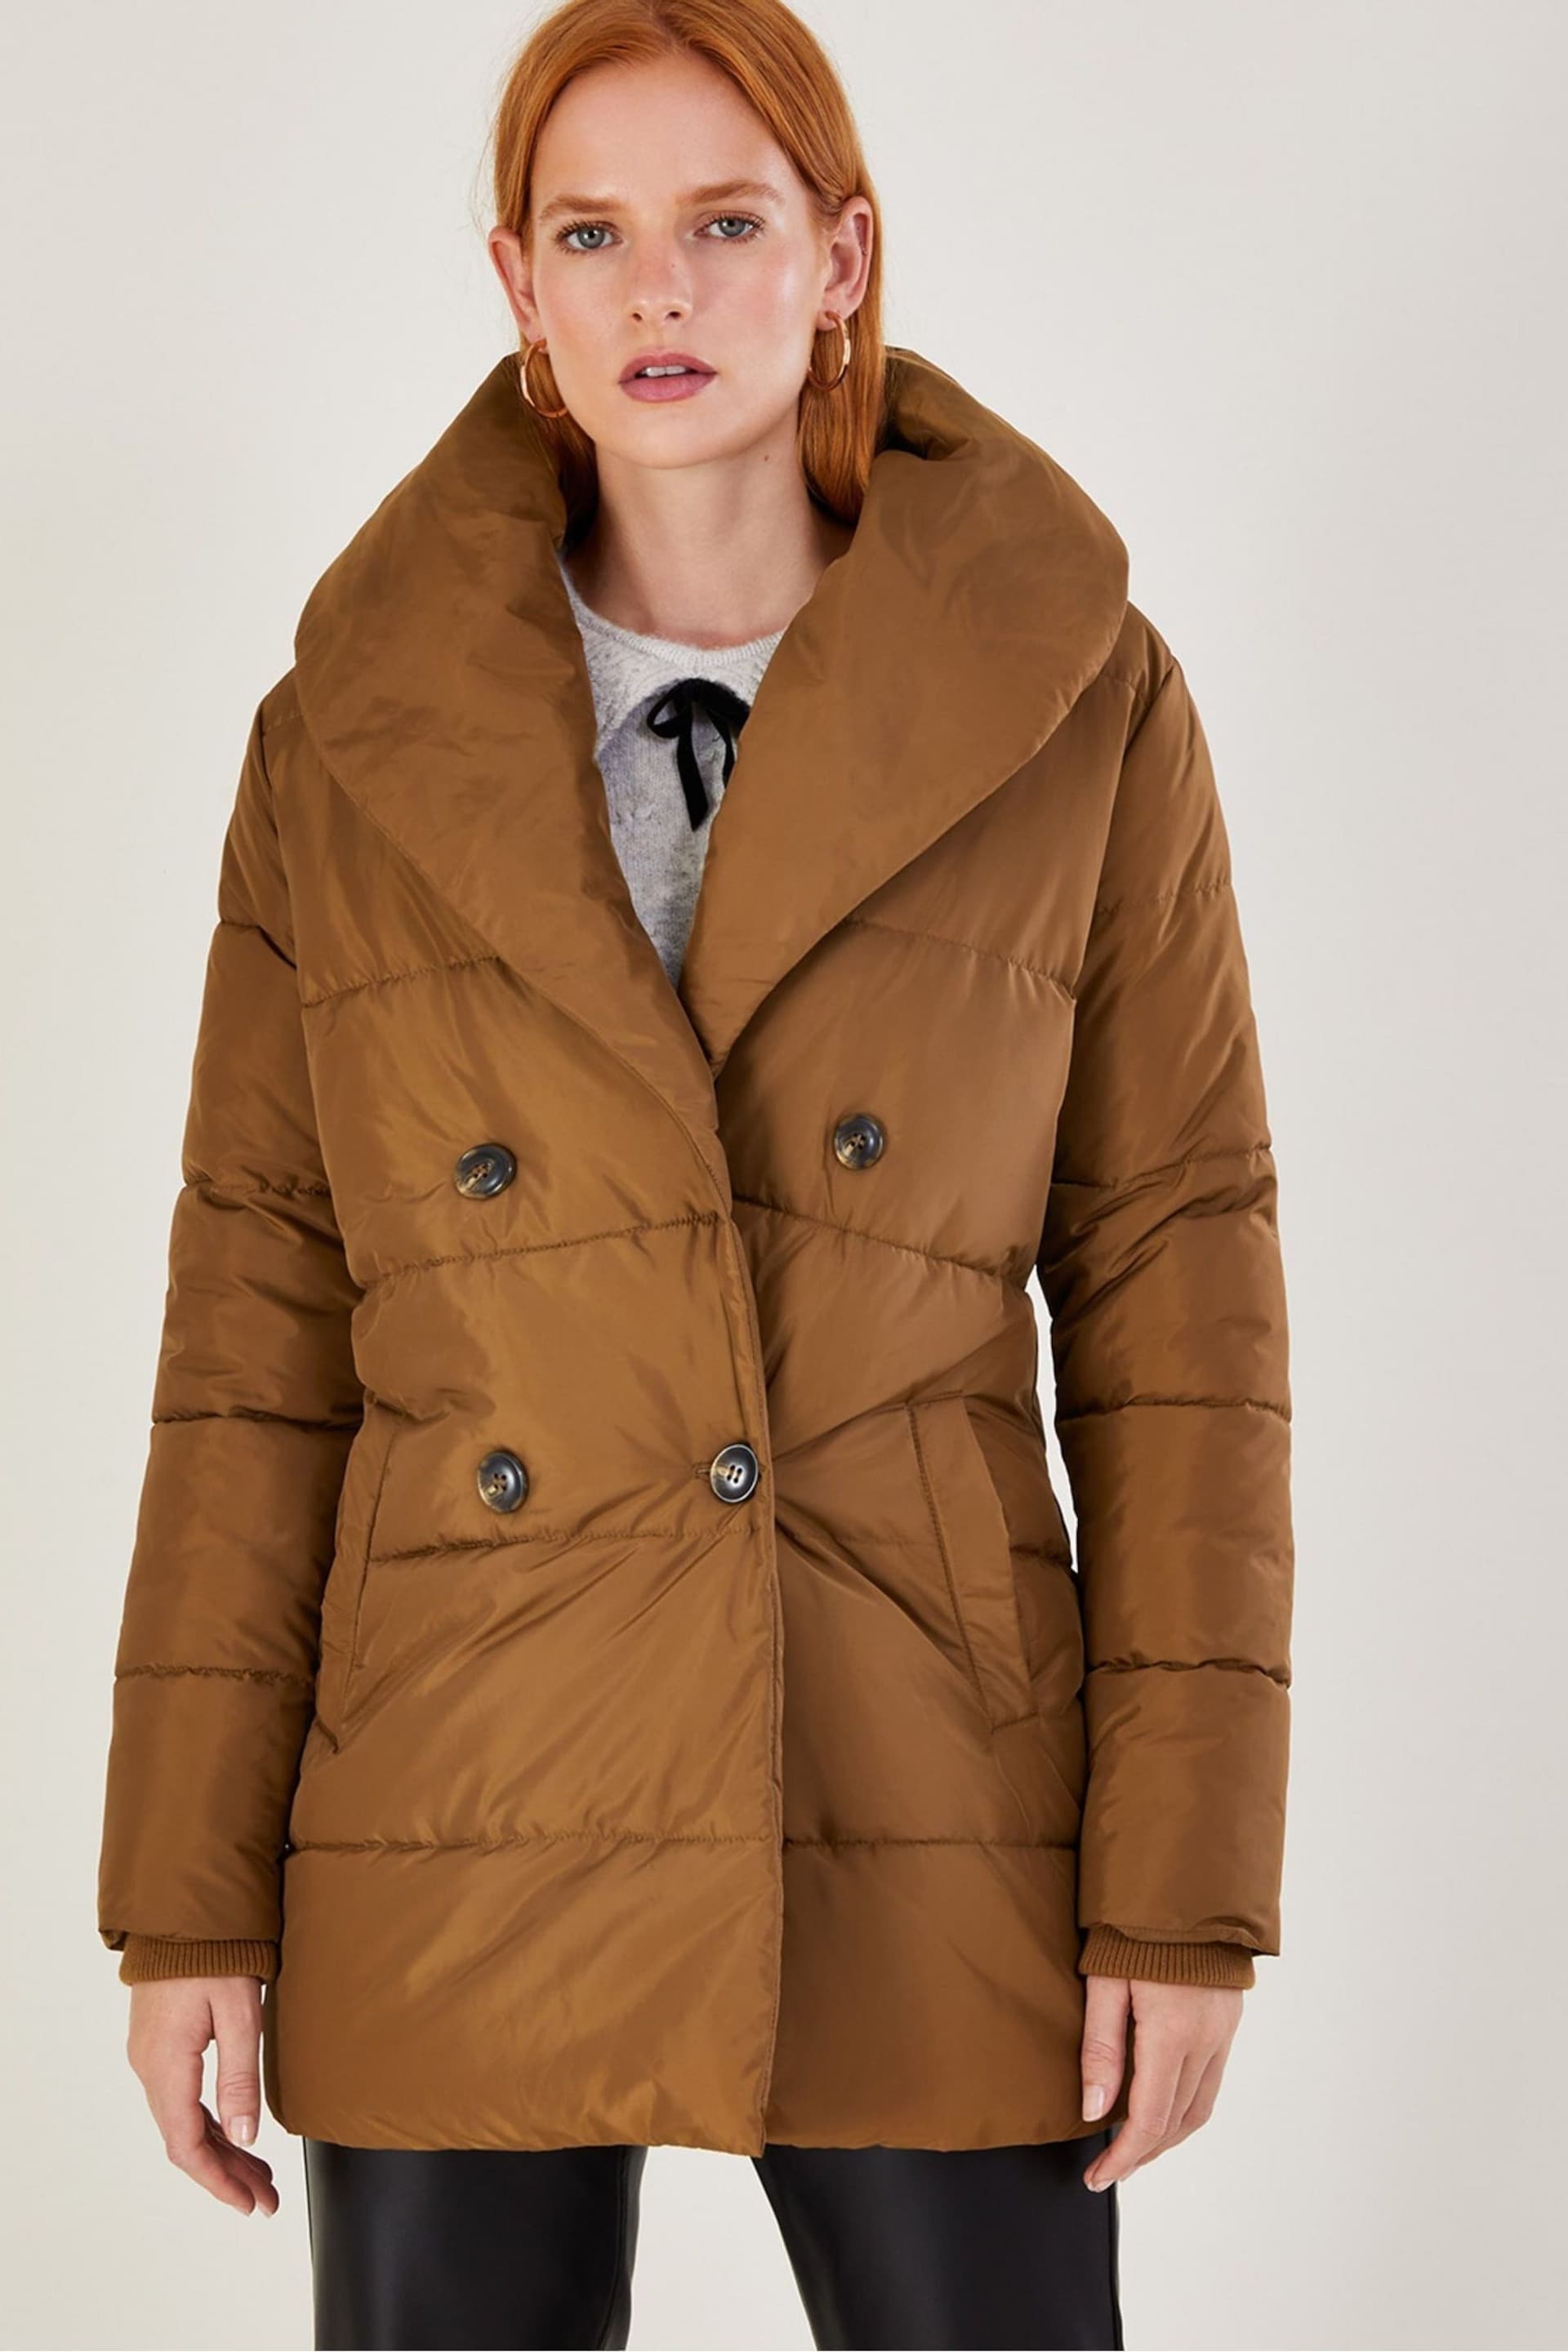 Monsoon Brown Shawl Collar Shannon Padded Coat - Image 1 of 4